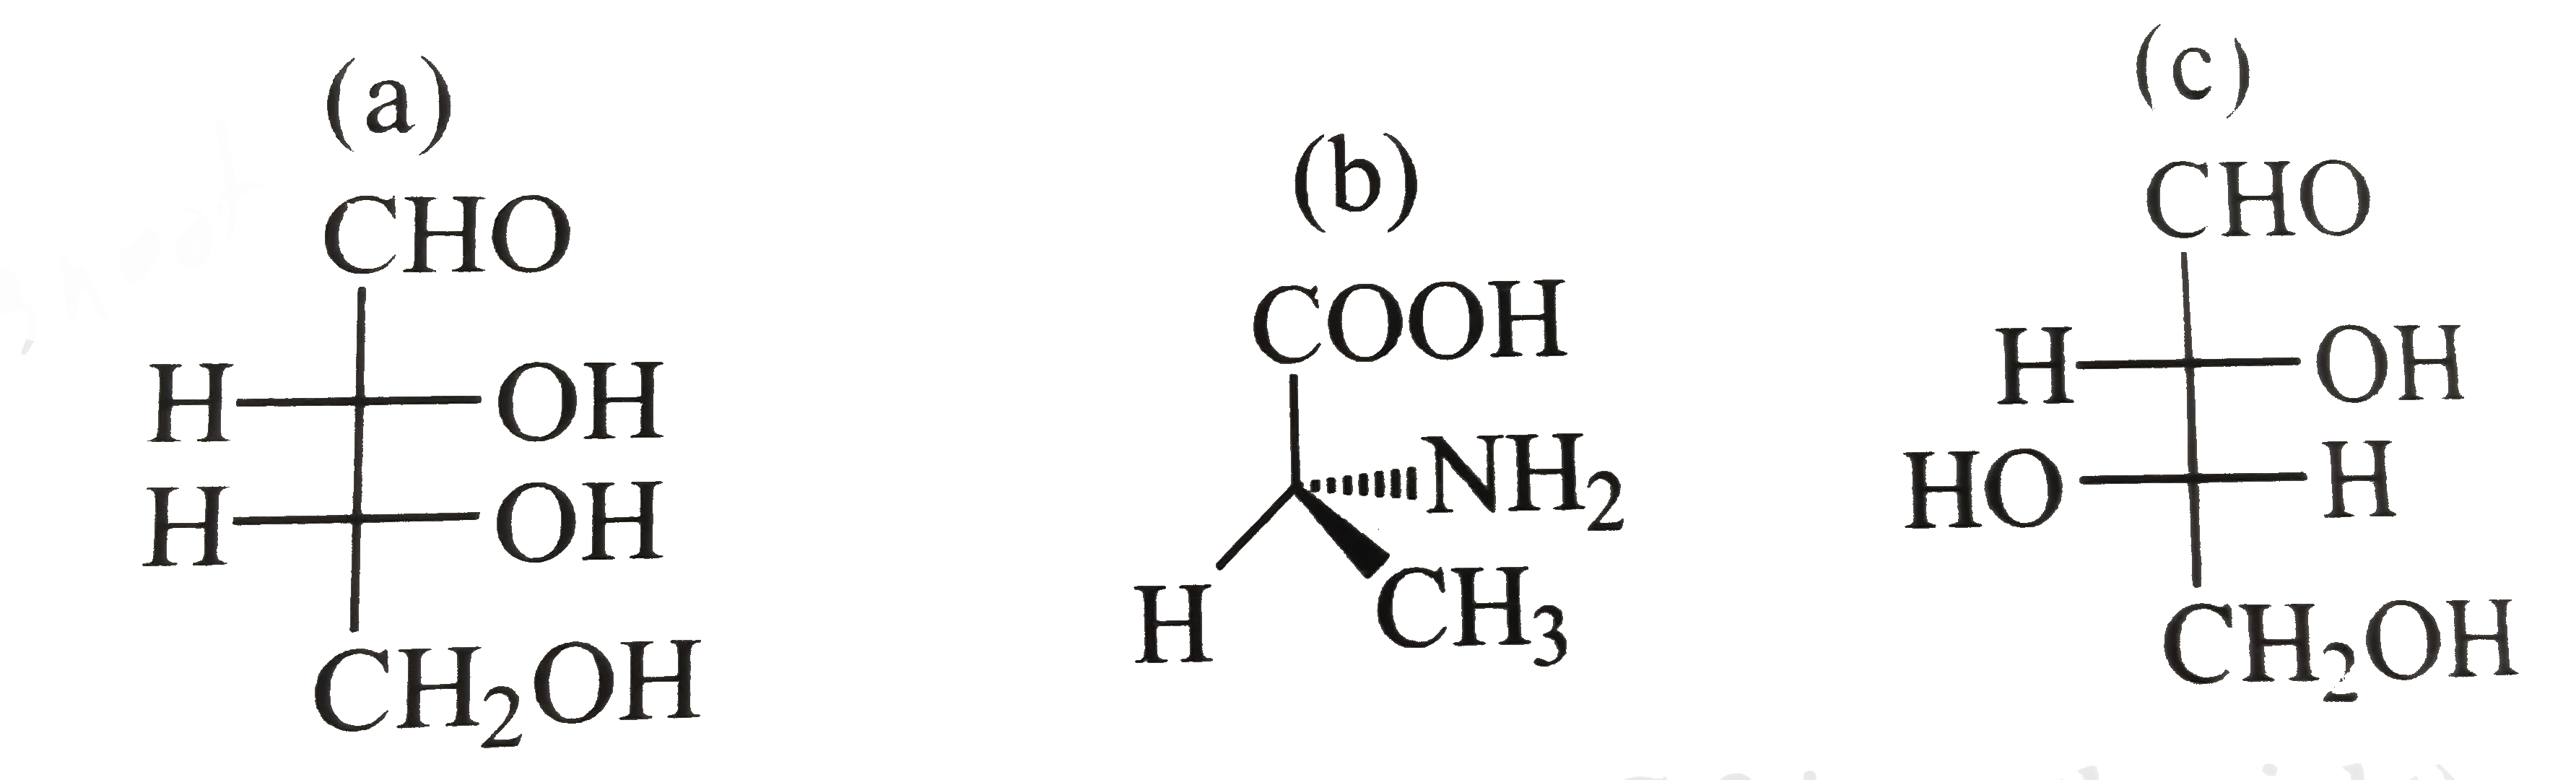 Specify the configuration of following compounds in D of L.